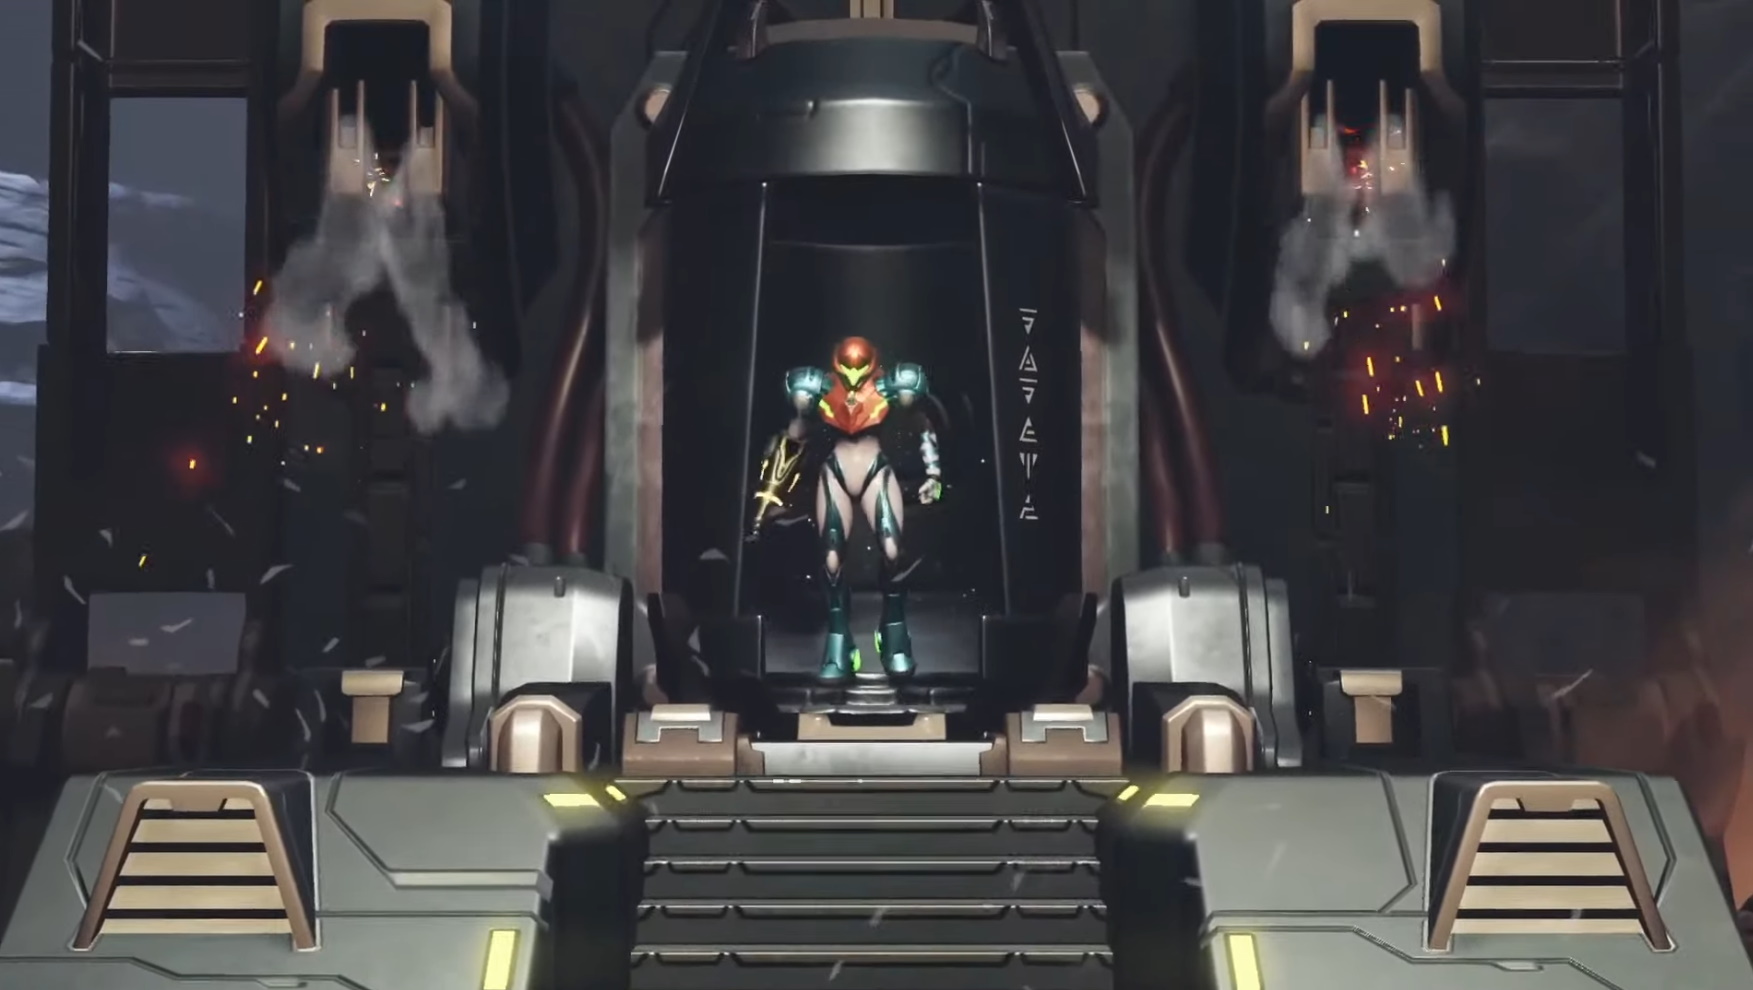 Samus steps out of a chamber in a screenshot from Metroid Dread.